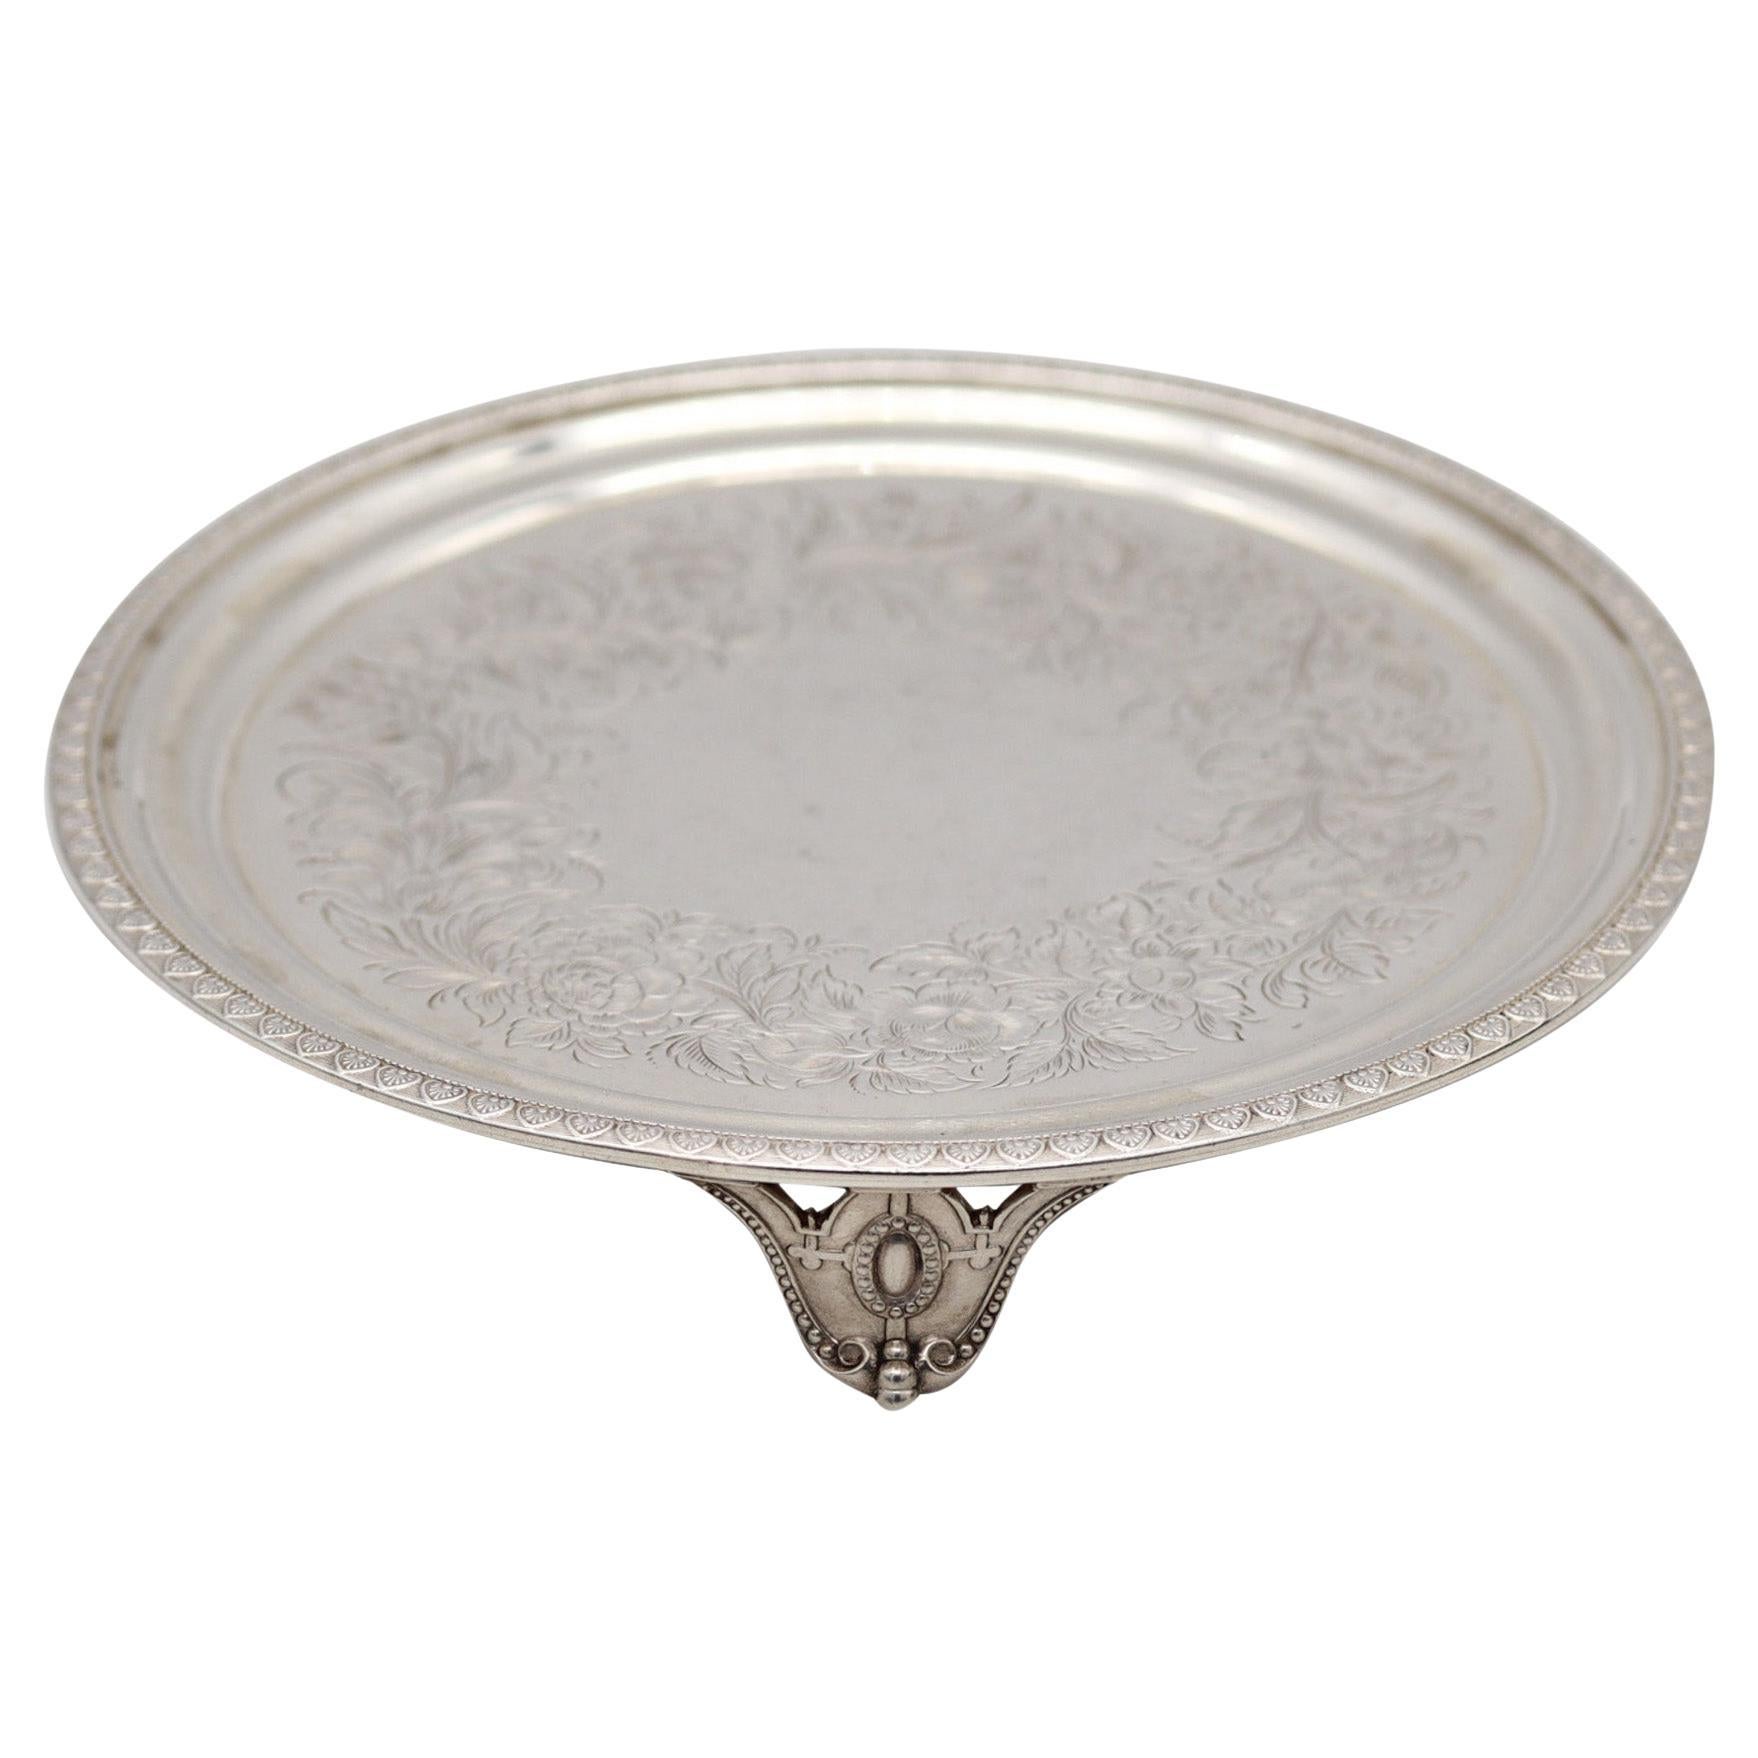 Tiffany & Co. 1858 New York Round Display Tray In Solid .925 Sterling Silver For Sale